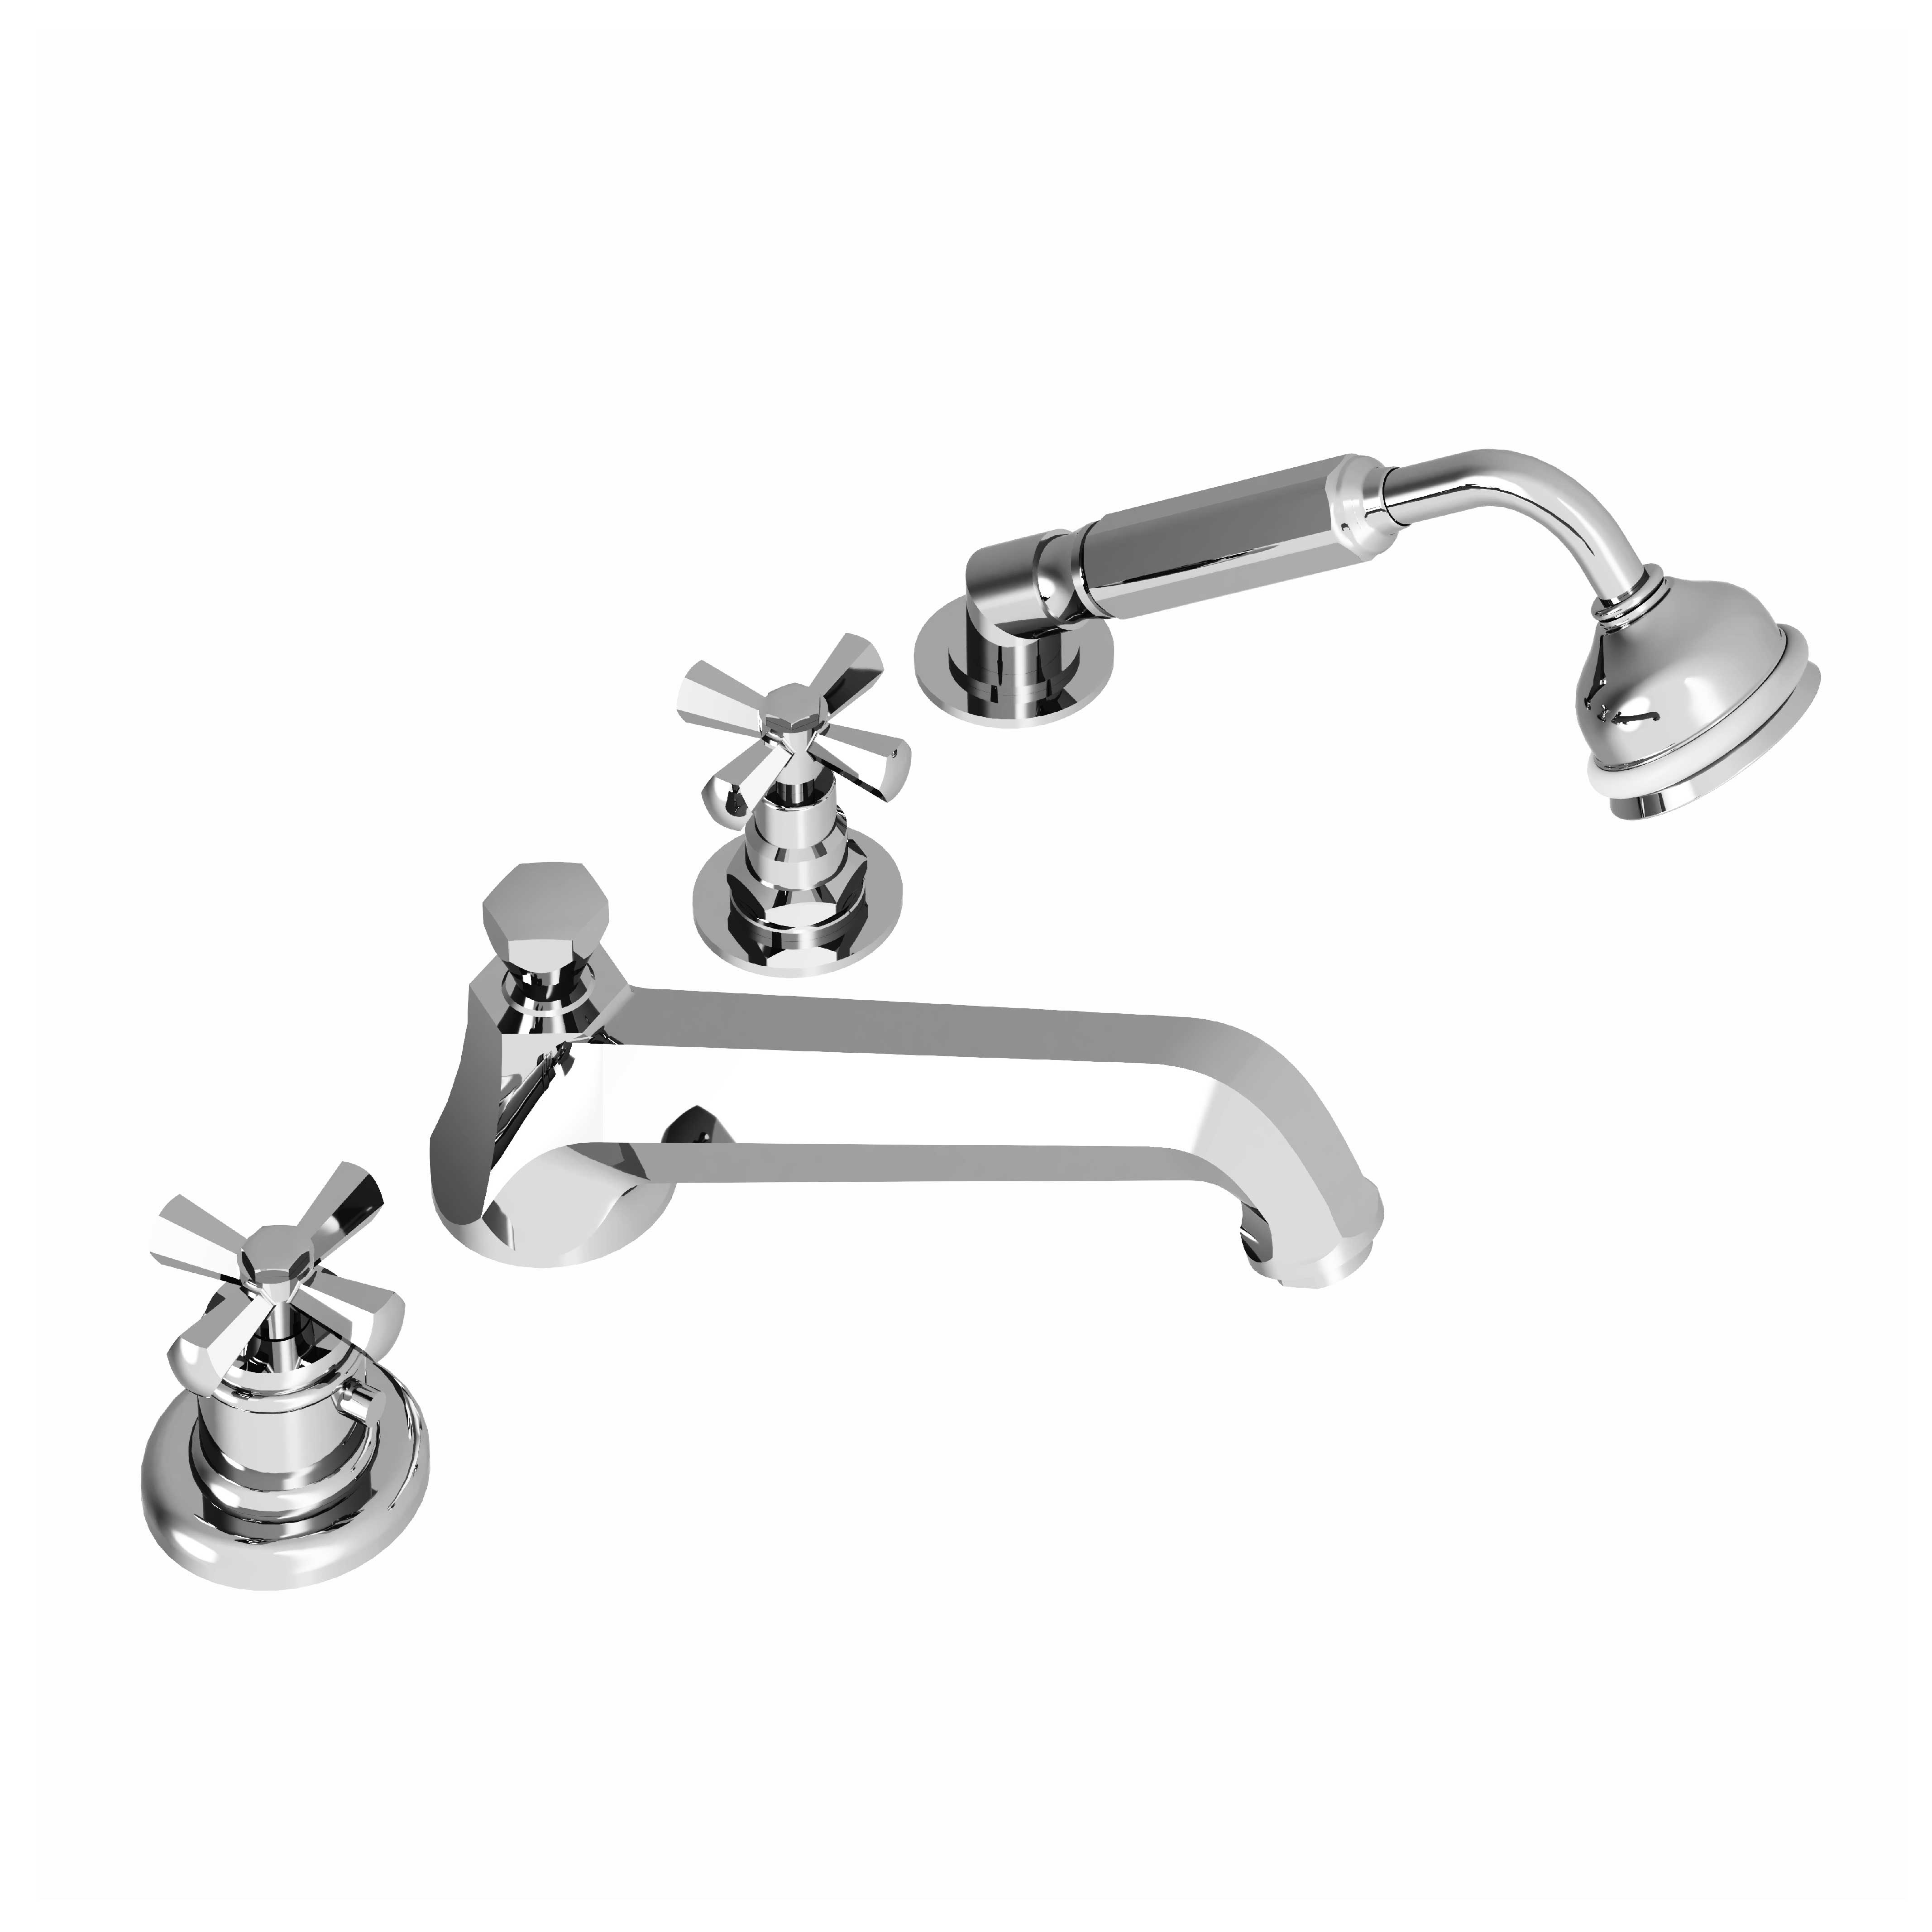 M38-3304T 4-hole bath and shower thermo. mixer